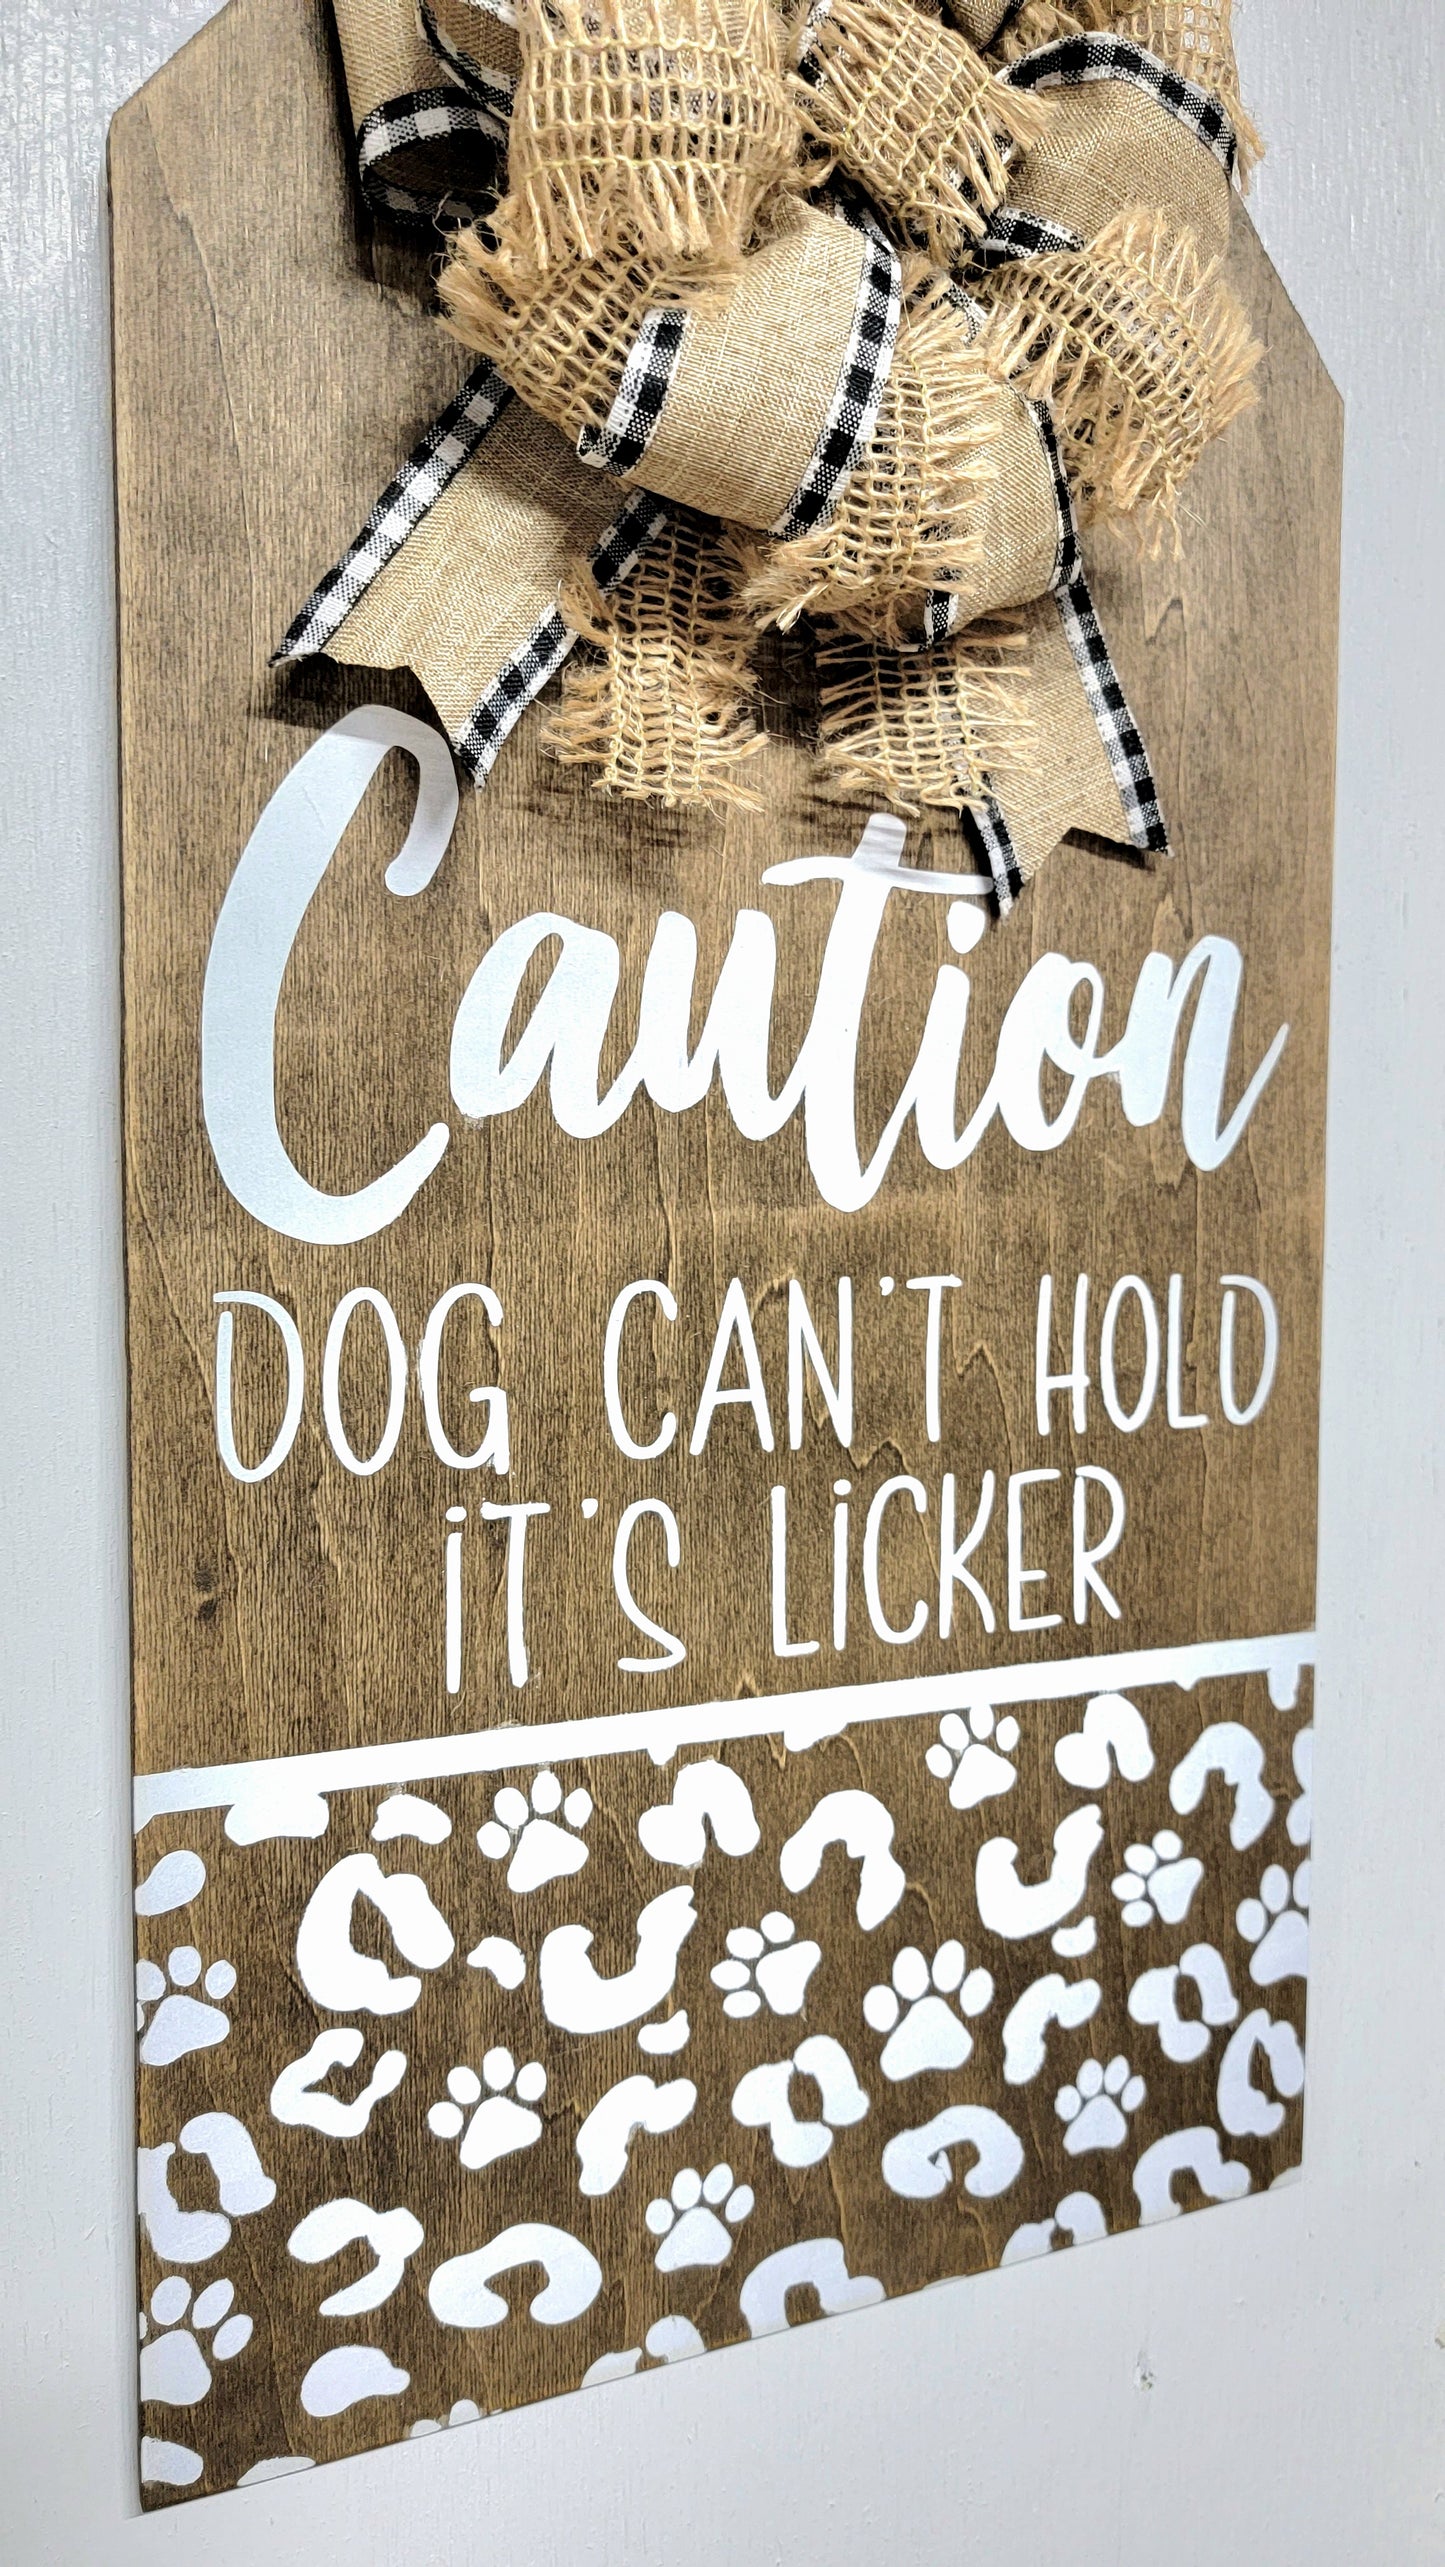 Dog Can't Hold Licker